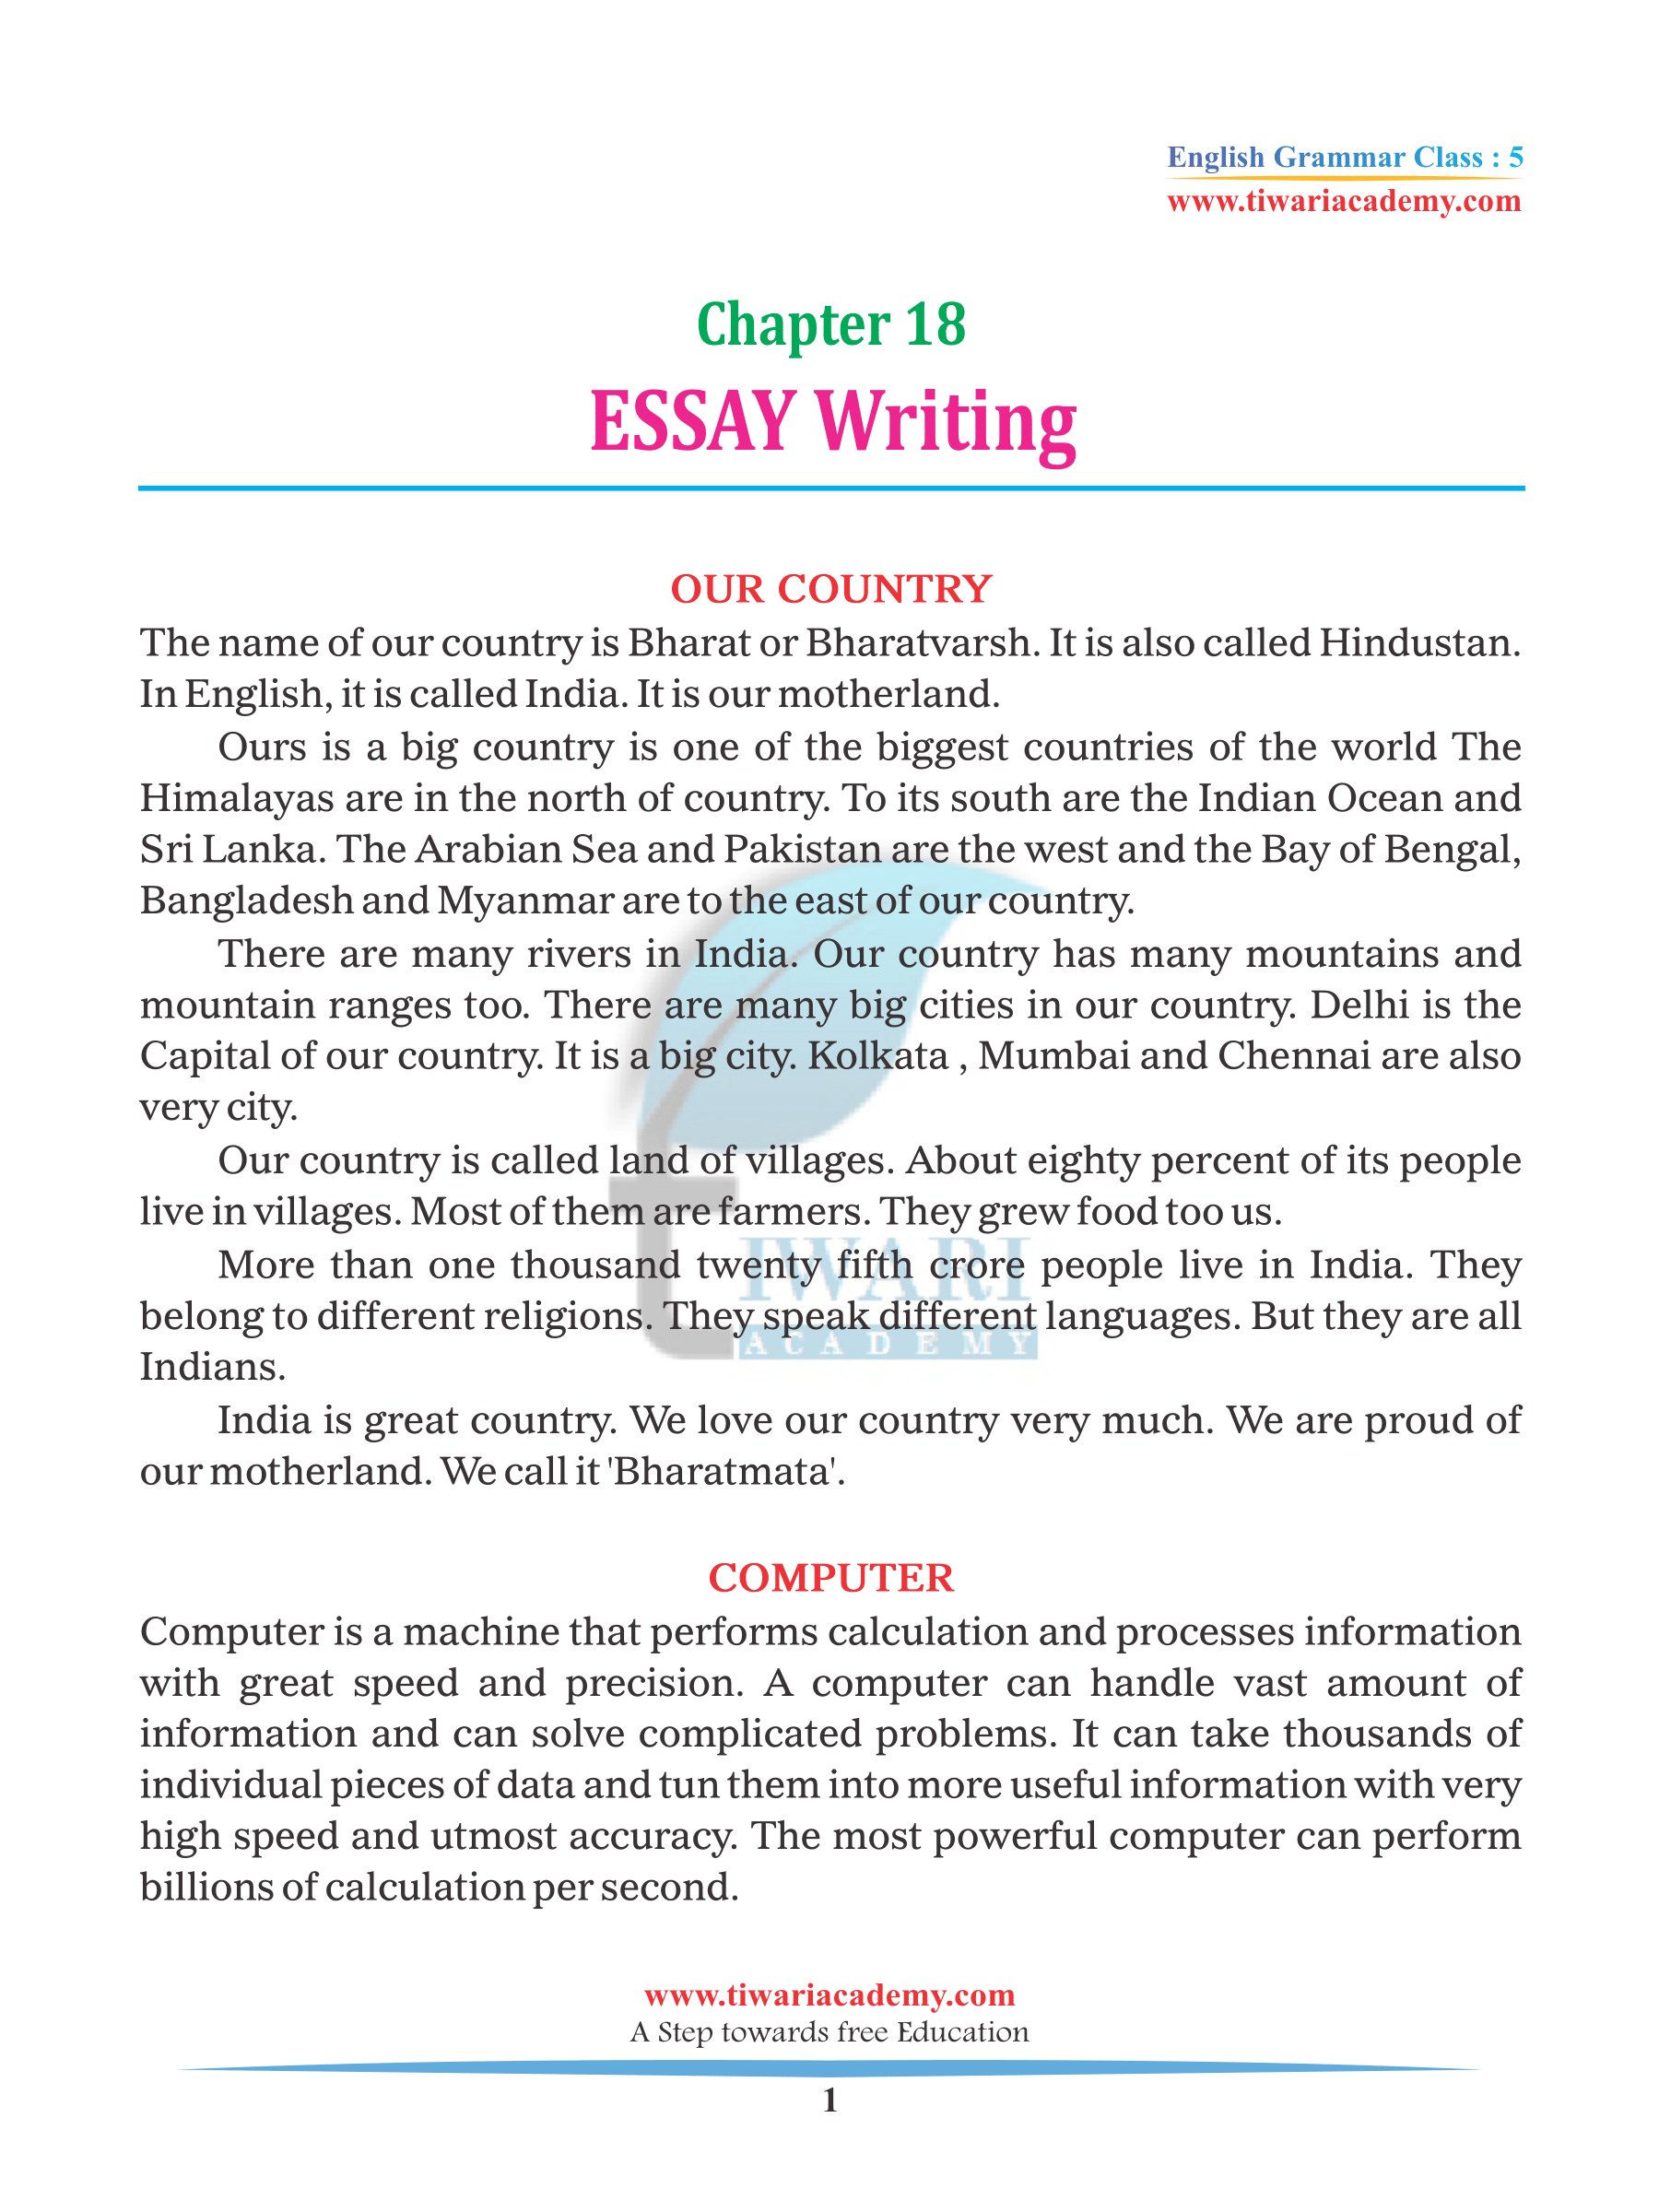 topics of essay for class 5